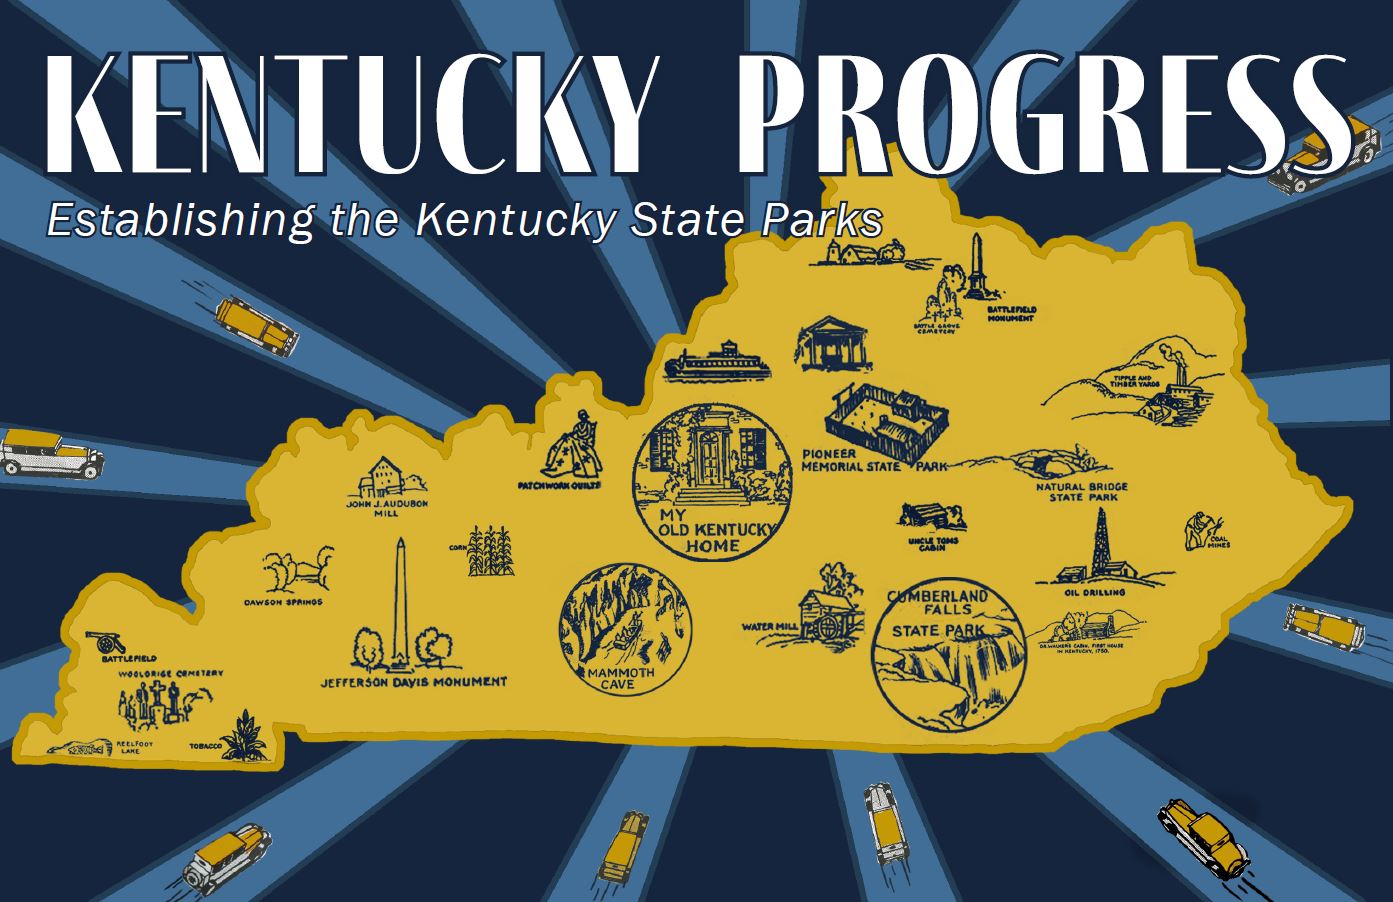 Outline of the state of Kentucky with locations of state parks on it. Writing reads: "Kentucky Progress: Establishing the Kentucky State Parks.